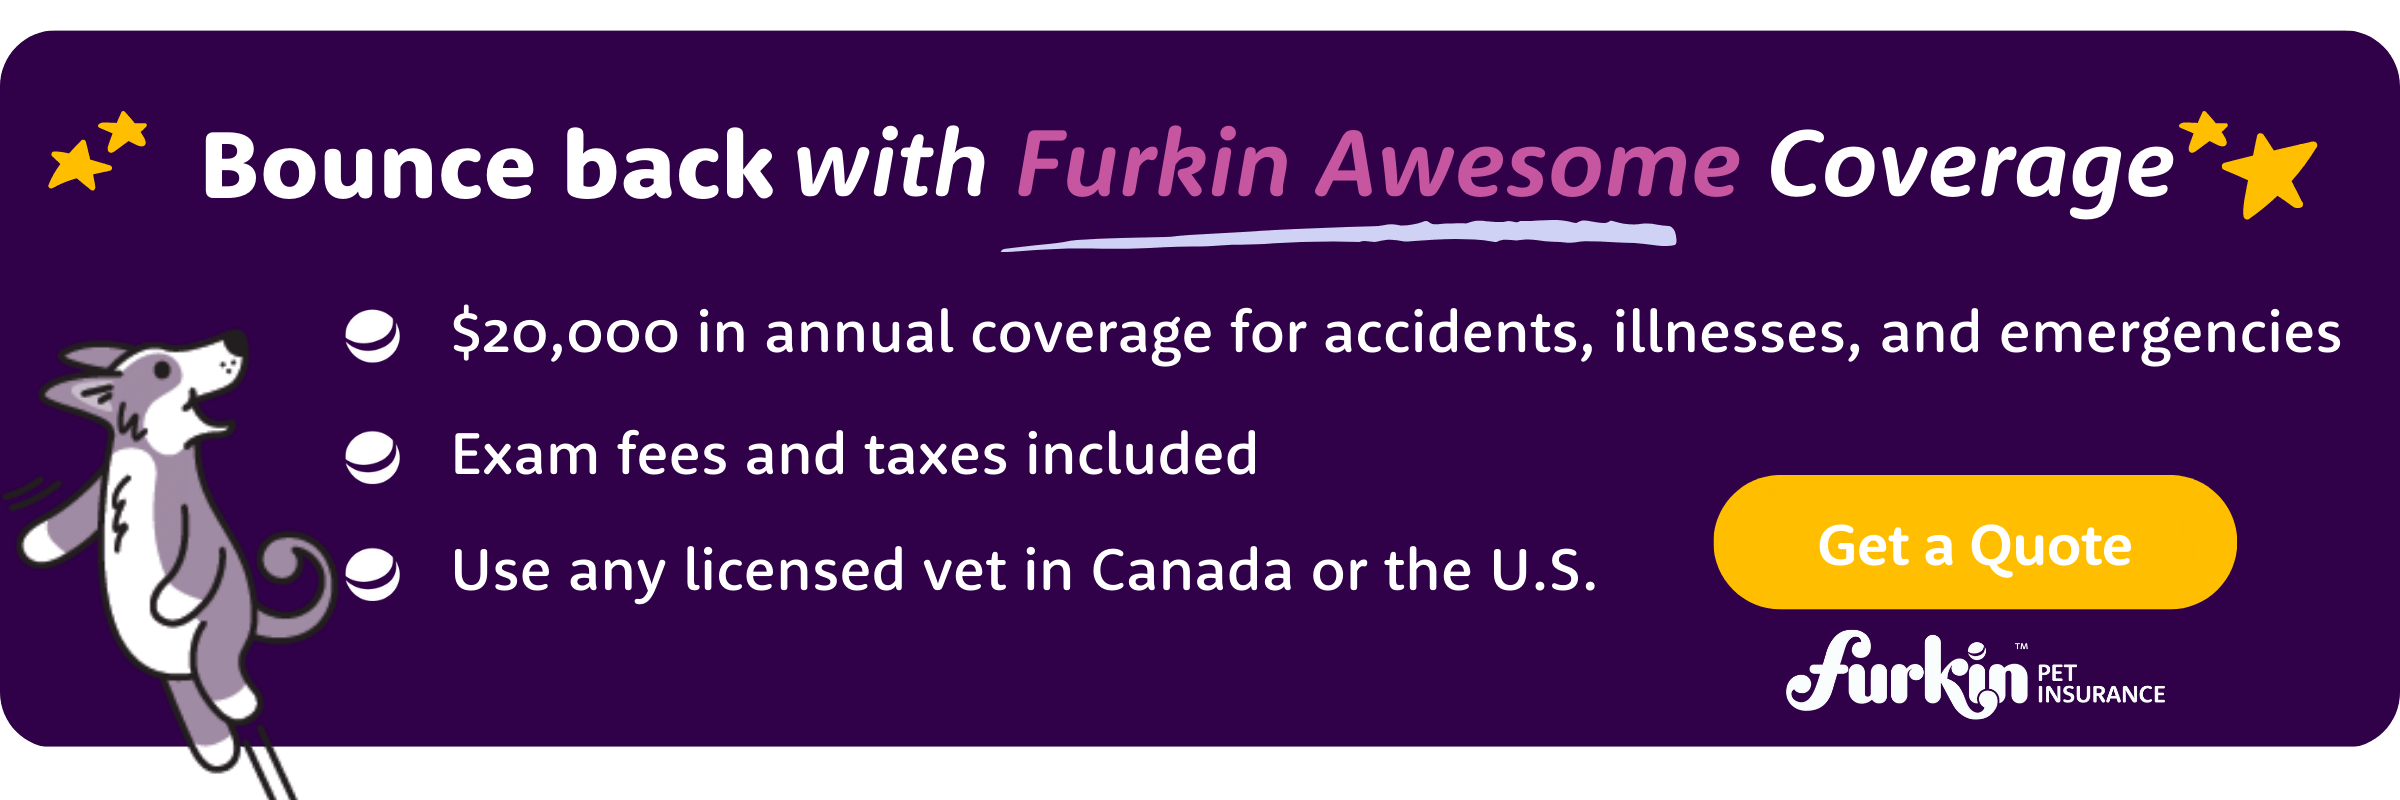 Bounce back with Furkin Awesome Coverage $20k annual coverage accidents, illnesses, emergencies; exam fees and taxes covered; licensed vets in CAN/US